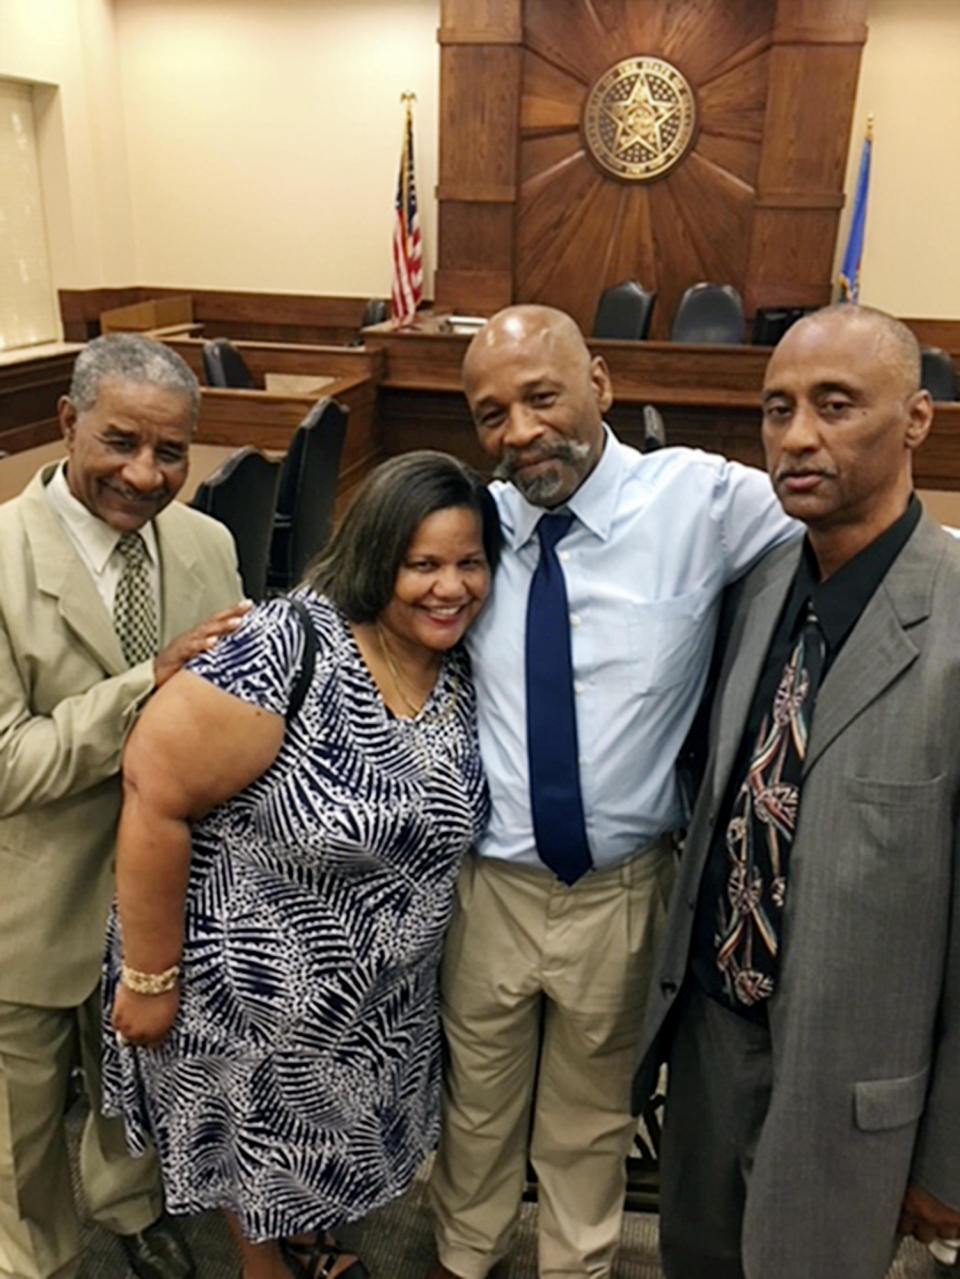 FILE - This photo provided by the Innocence Project shows Perry Lott, second from right, inside a courtroom in Oklahoma City, July 9, 2018, with his brother Steve Lott, left; sister Tammy Lott, center; and brother Willie Lott, right; after being freed from prison when the Innocence Project presented DNA evidence it says excluded him from the crime. An Oklahoma judge on Tuesday, Oct. 10, 2023, exonerated Lott, who spent 30 years in prison for a 1987 rape and burglary, after post-conviction DNA testing from a rape kit showed he did not commit the crime. (Karen Thompson/Innocence Project via AP, File)